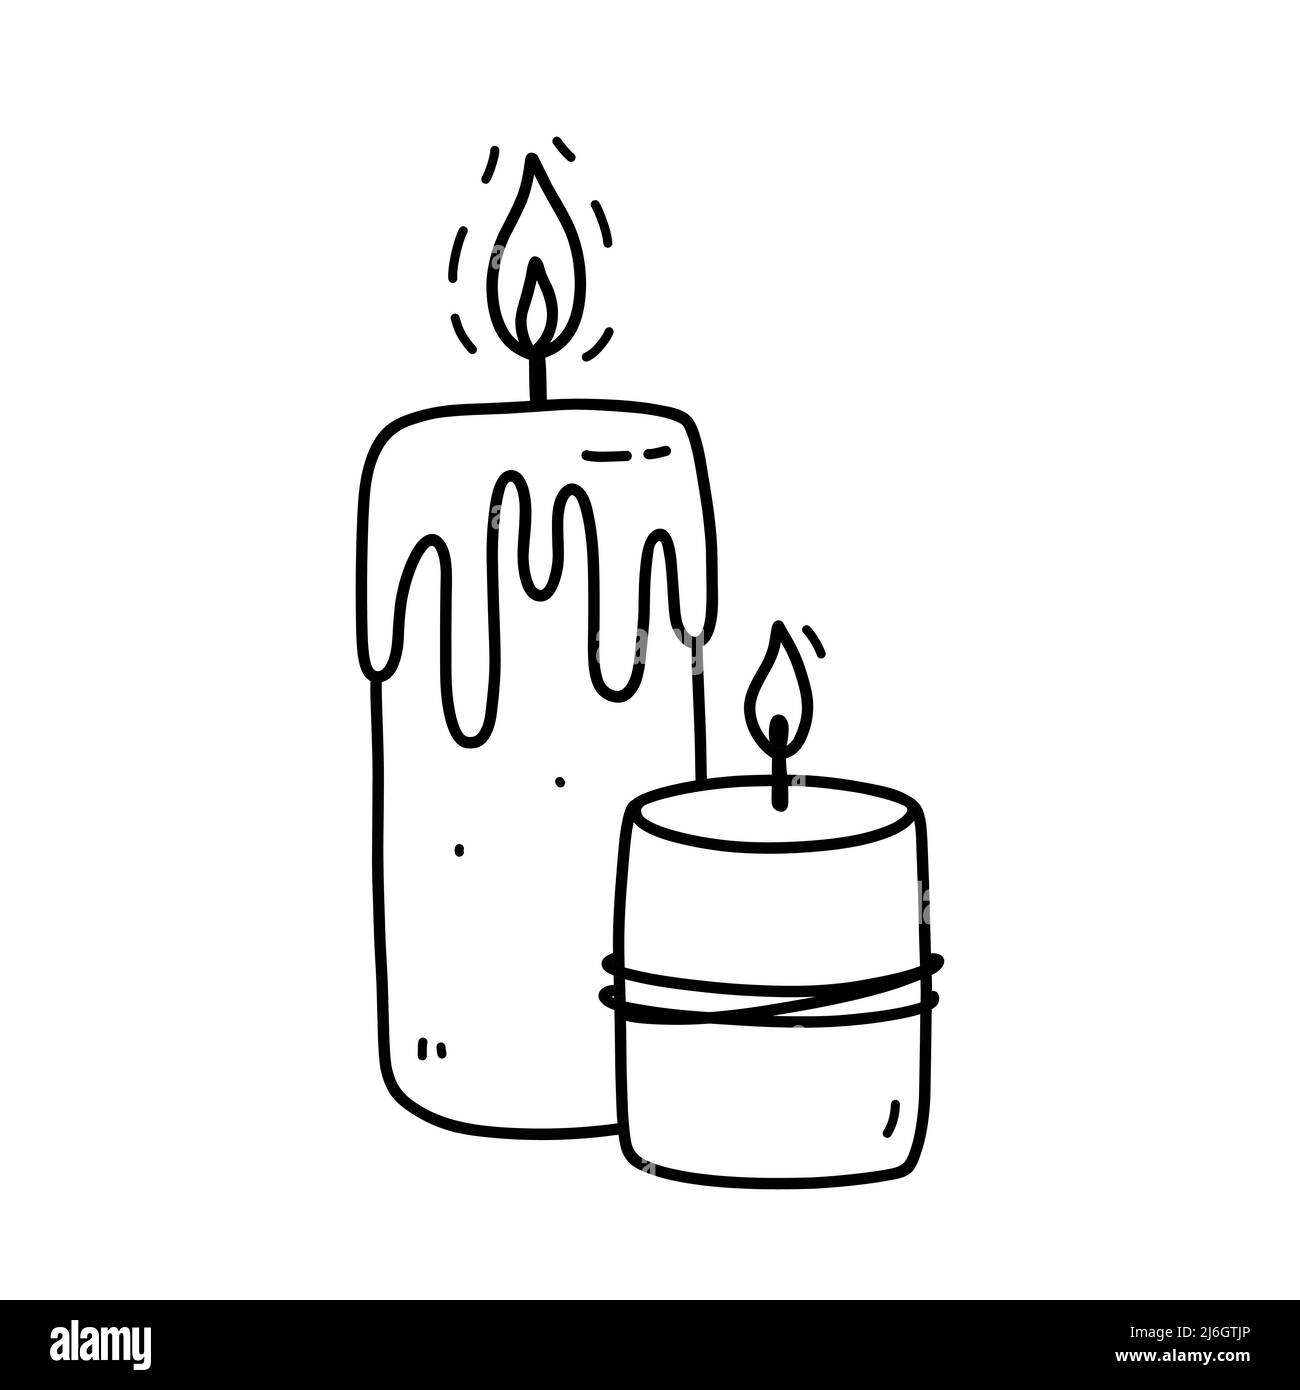 Two burning candles with dripping wax isolated on white background. Vector hand-drawn illustration in doodle style. Perfect for cards, logo, holiday designs, decorations. Stock Vector